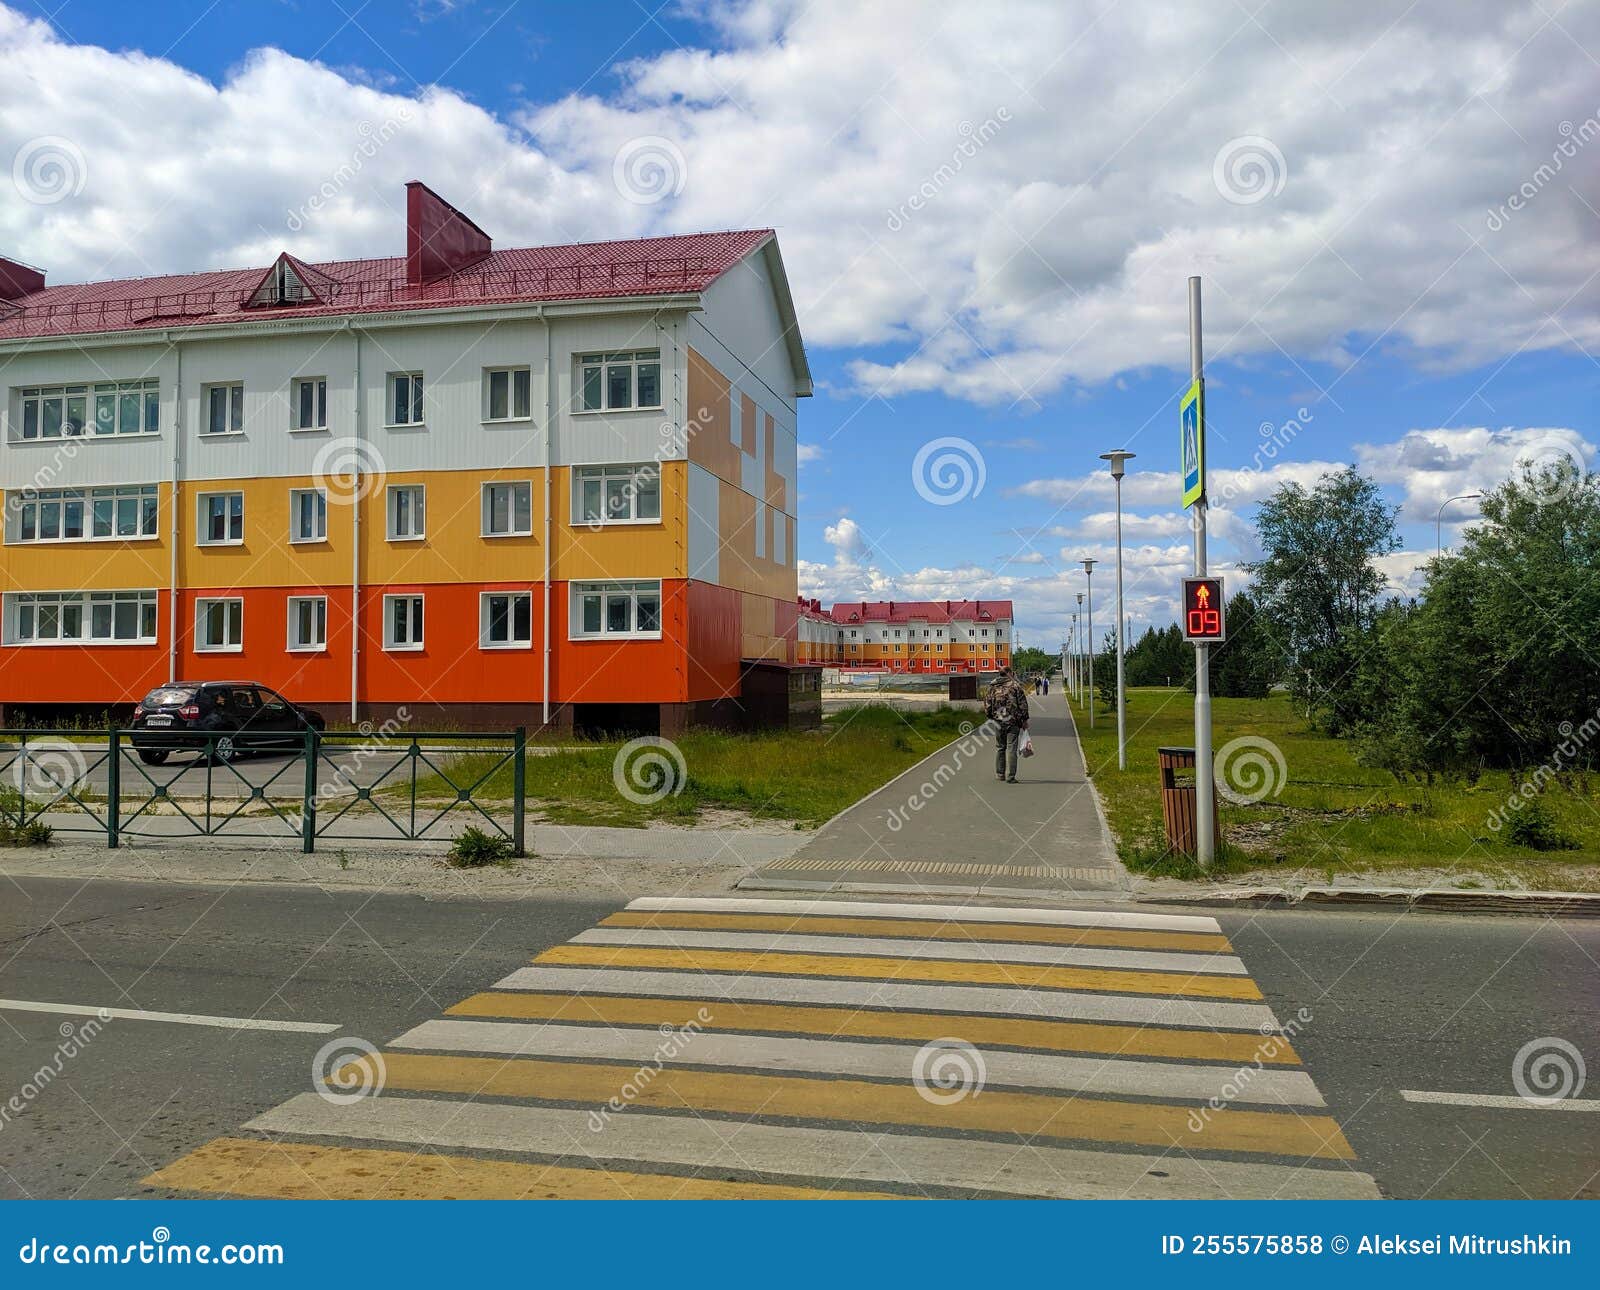 Noyabrsk, Russia - July 7, 2022: View of Bright Three-story Houses with